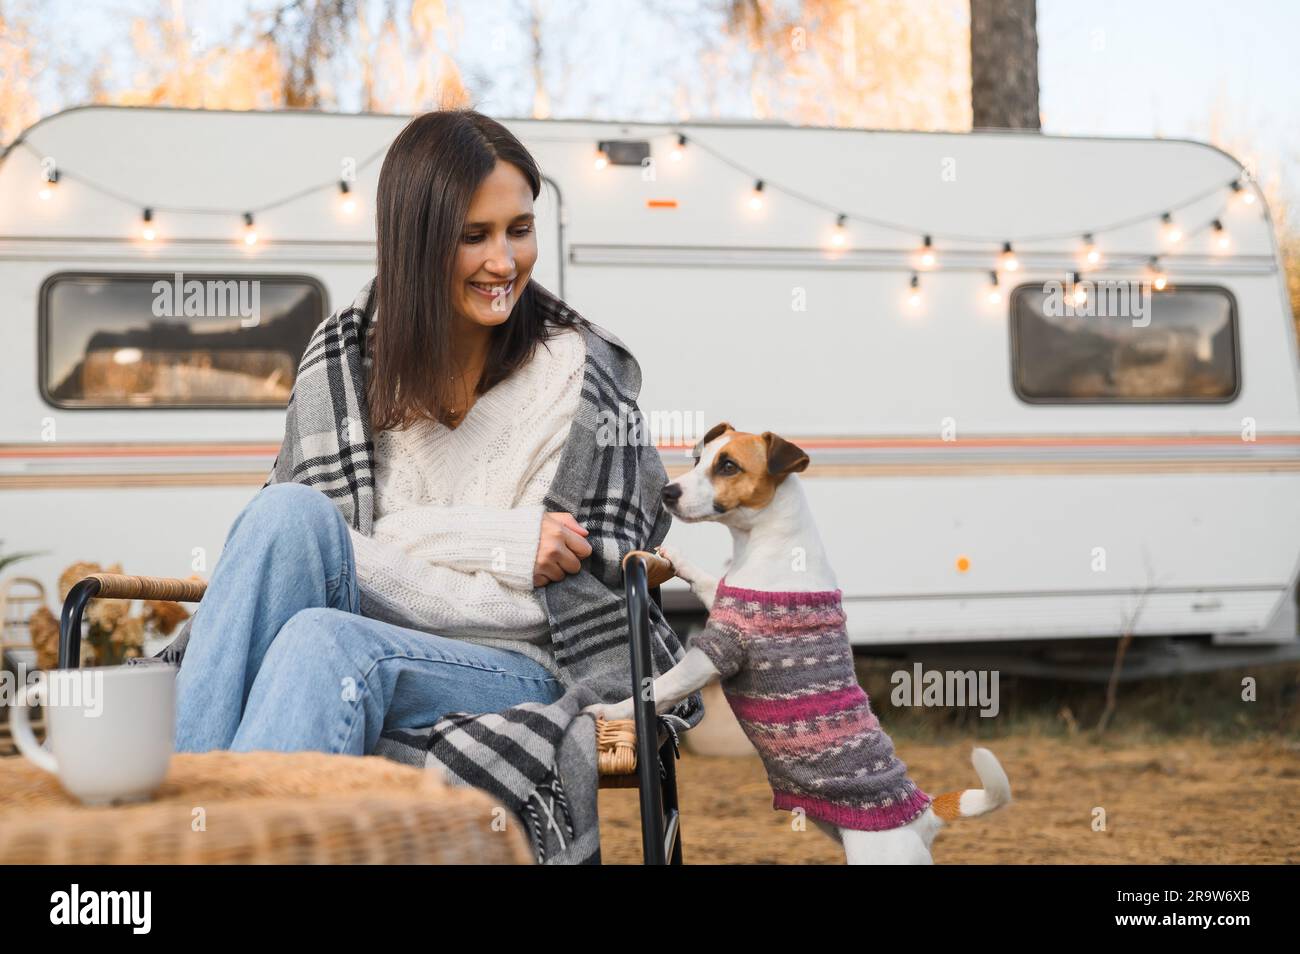 Caucasian woman sitting in a wicker chair wrapped in a blanket with a dog in the yard near the trailer in autumn.  Stock Photo